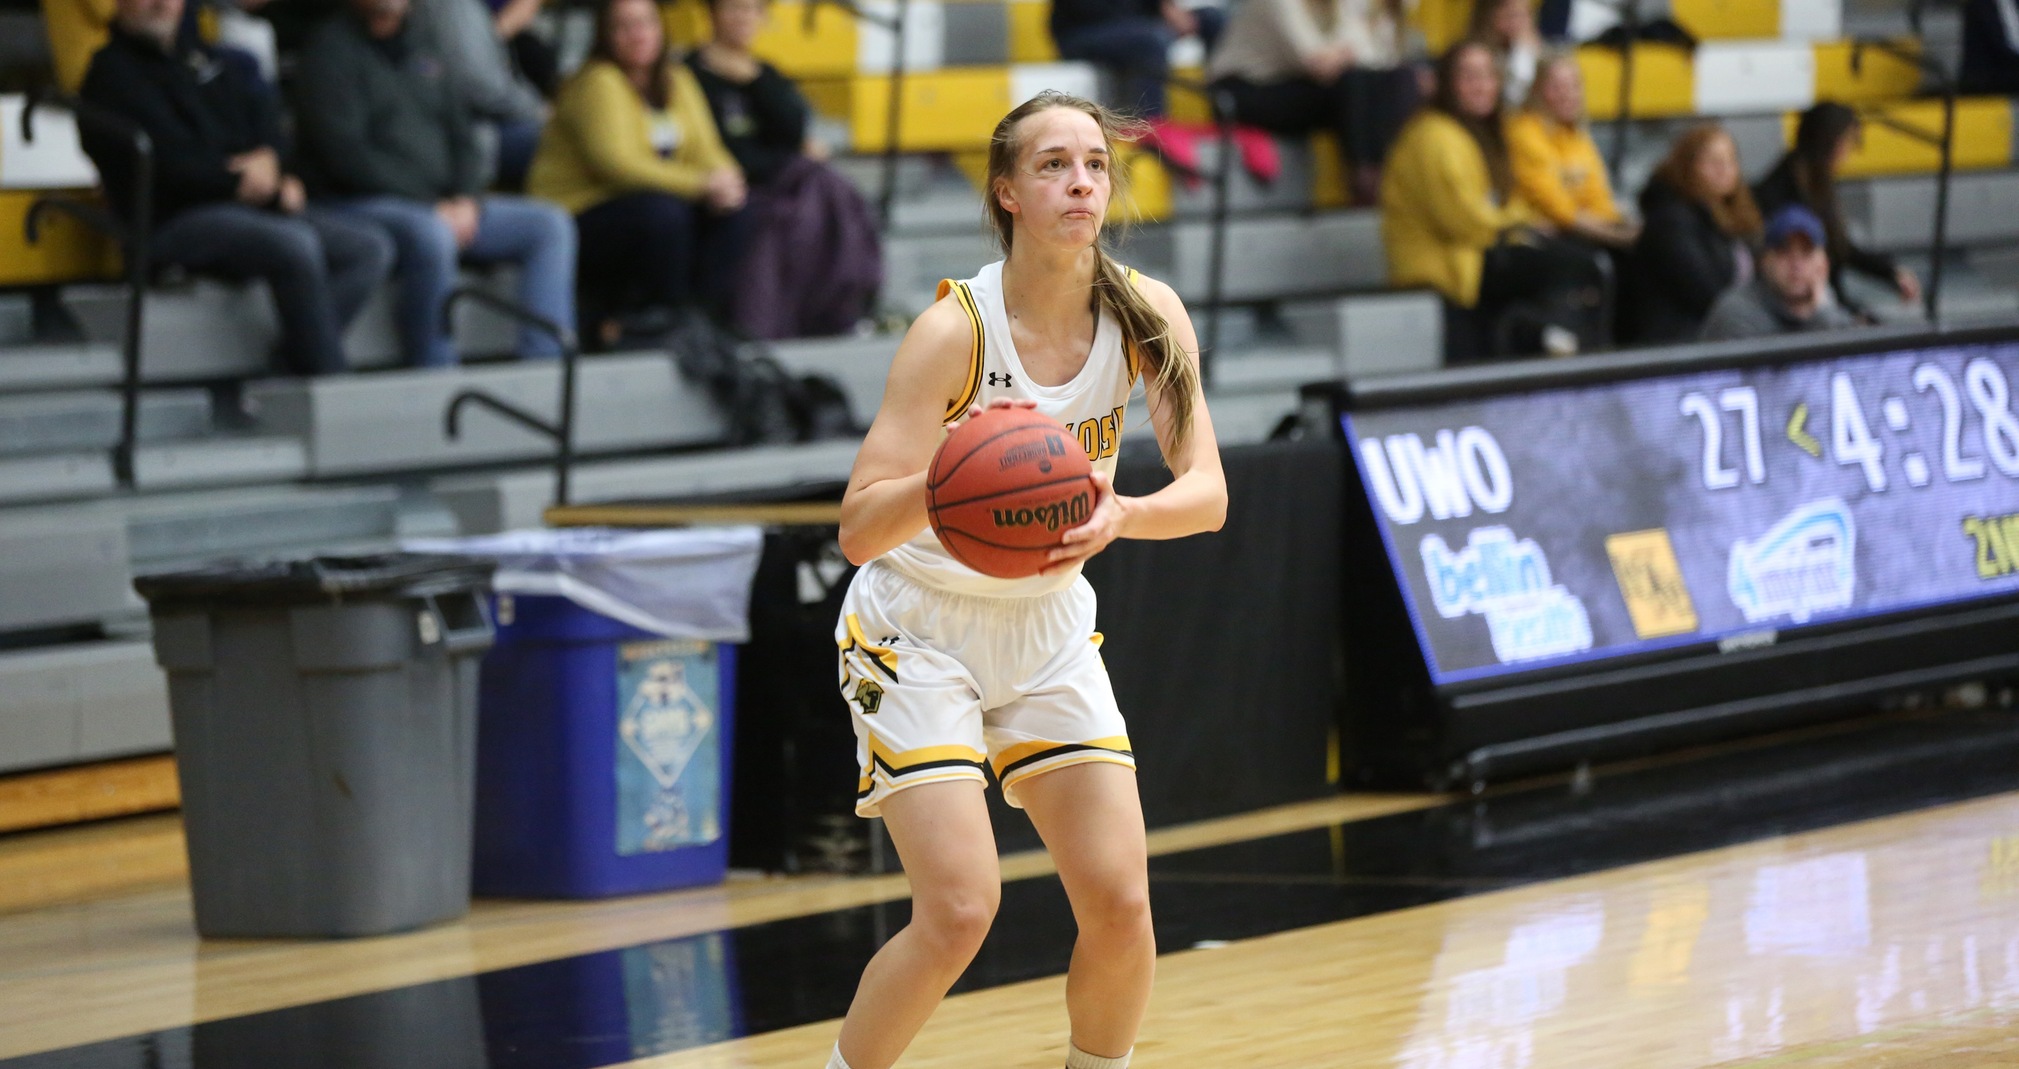 Jessie Rabas sparked UW-Oshkosh's second-half play against the Warhawks with six points, two rebounds and two blocked shots.